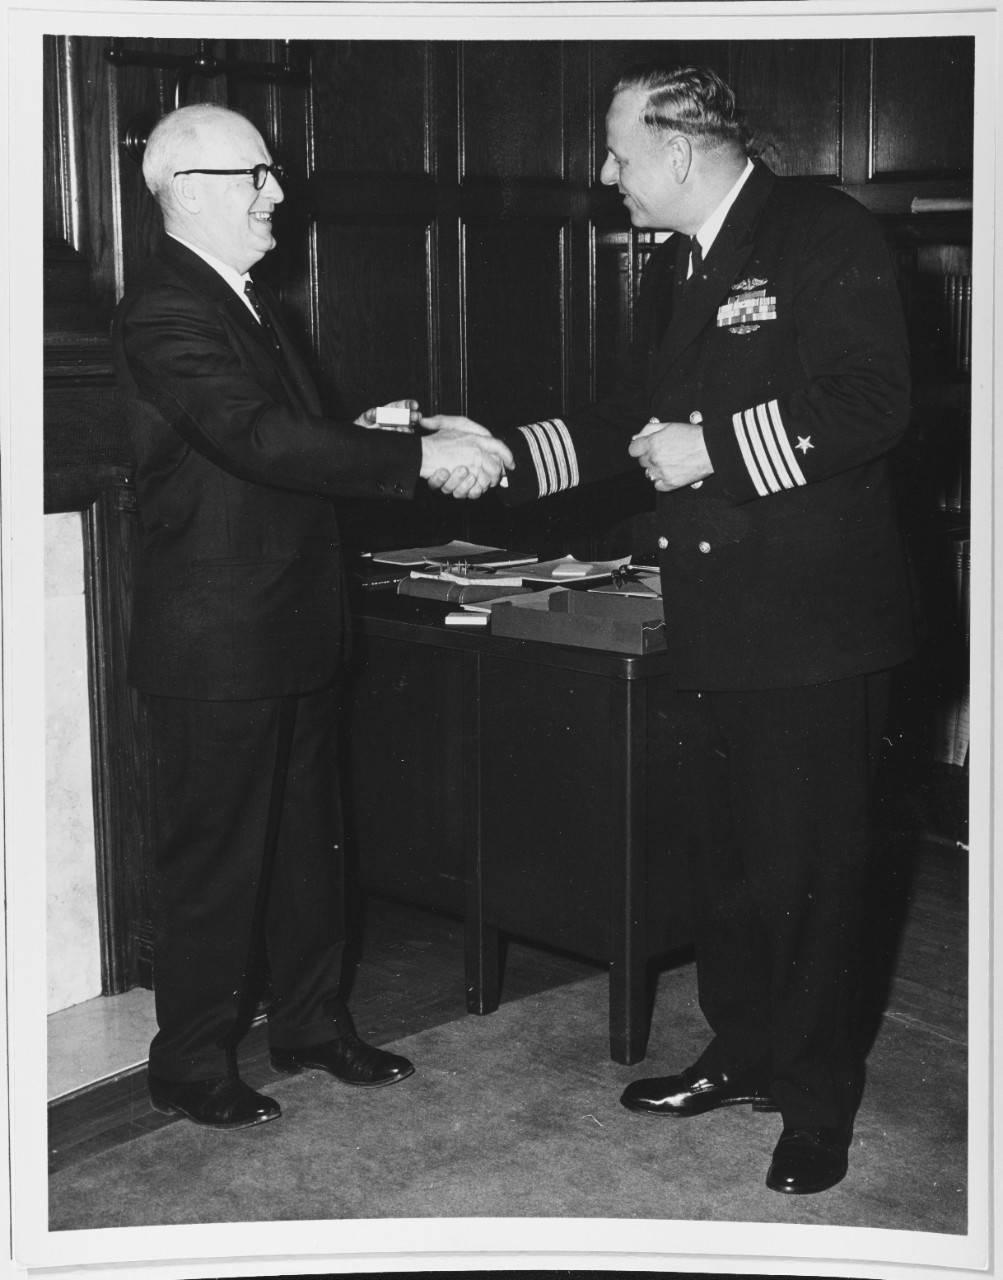 Council Chairman and Captain Kimmel at USS PORTLAND Memorial ceremonies, July 4, 1962